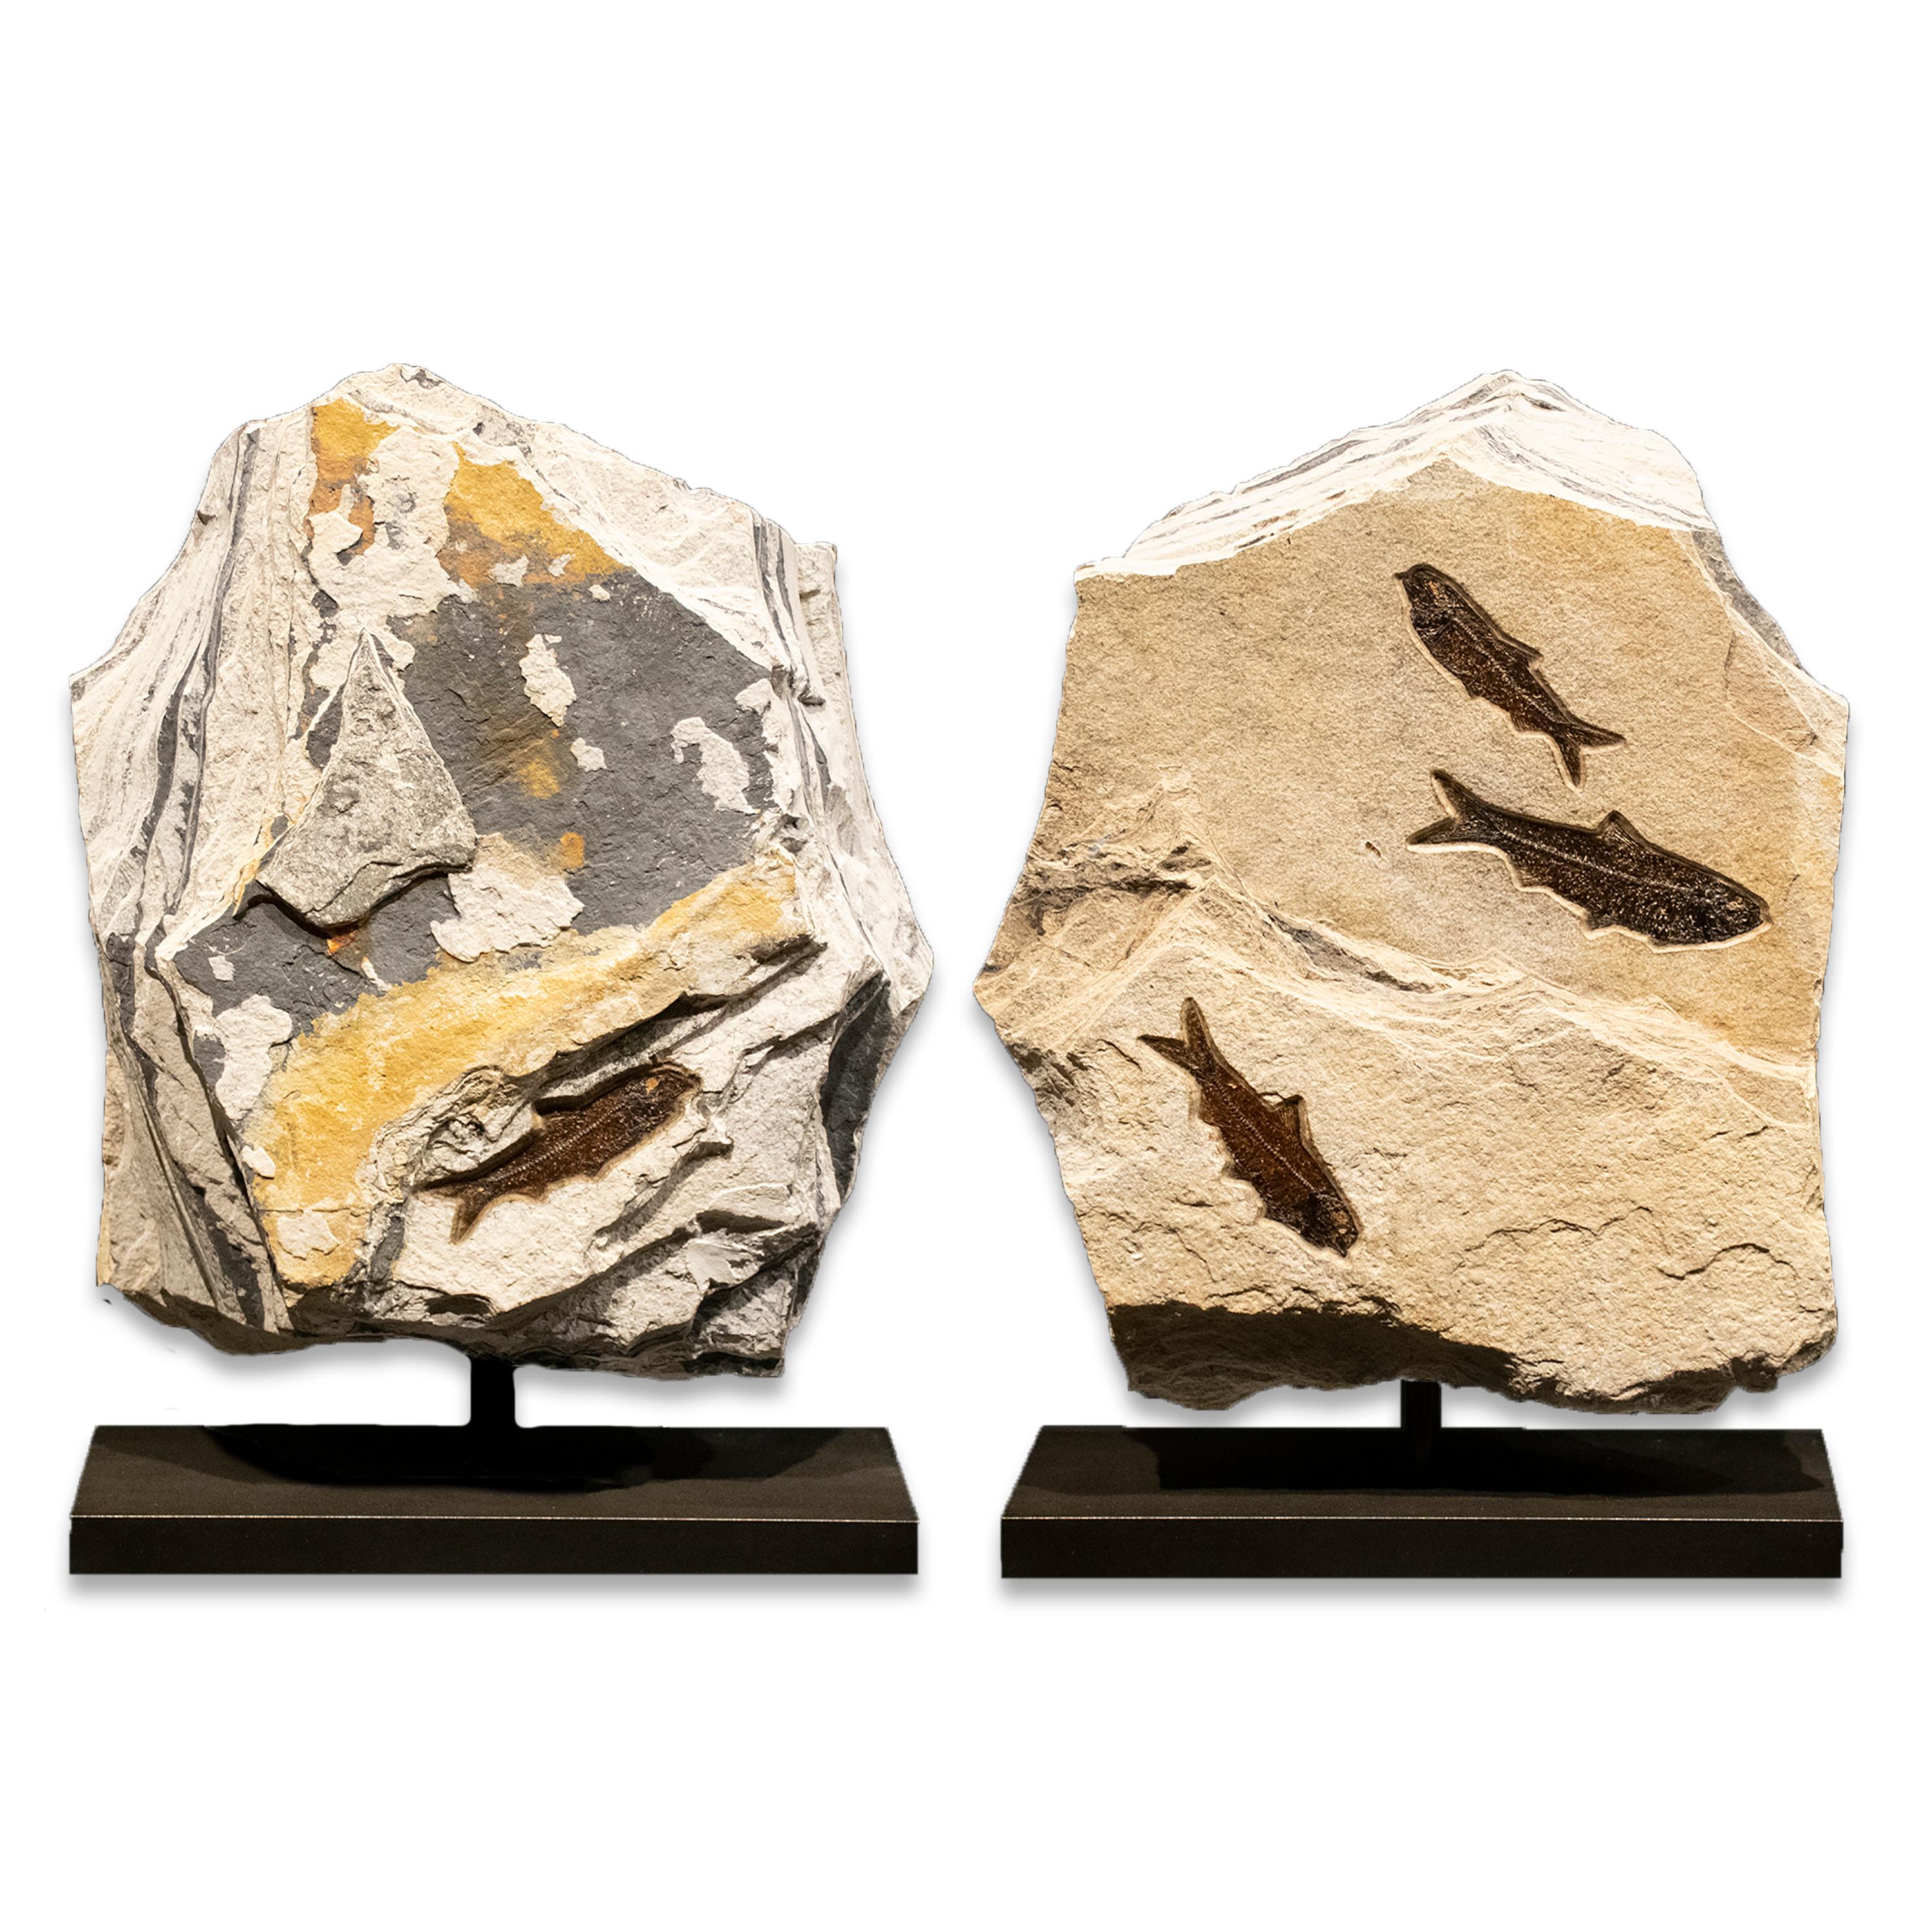 This fossil sculpture features four Knightia eocaena, all of which are Eocene era fossils dating back about 50 million years. These ancient fish are forever preserved in a beautifully textured matrix of natural, fossil-bearing limestone. This